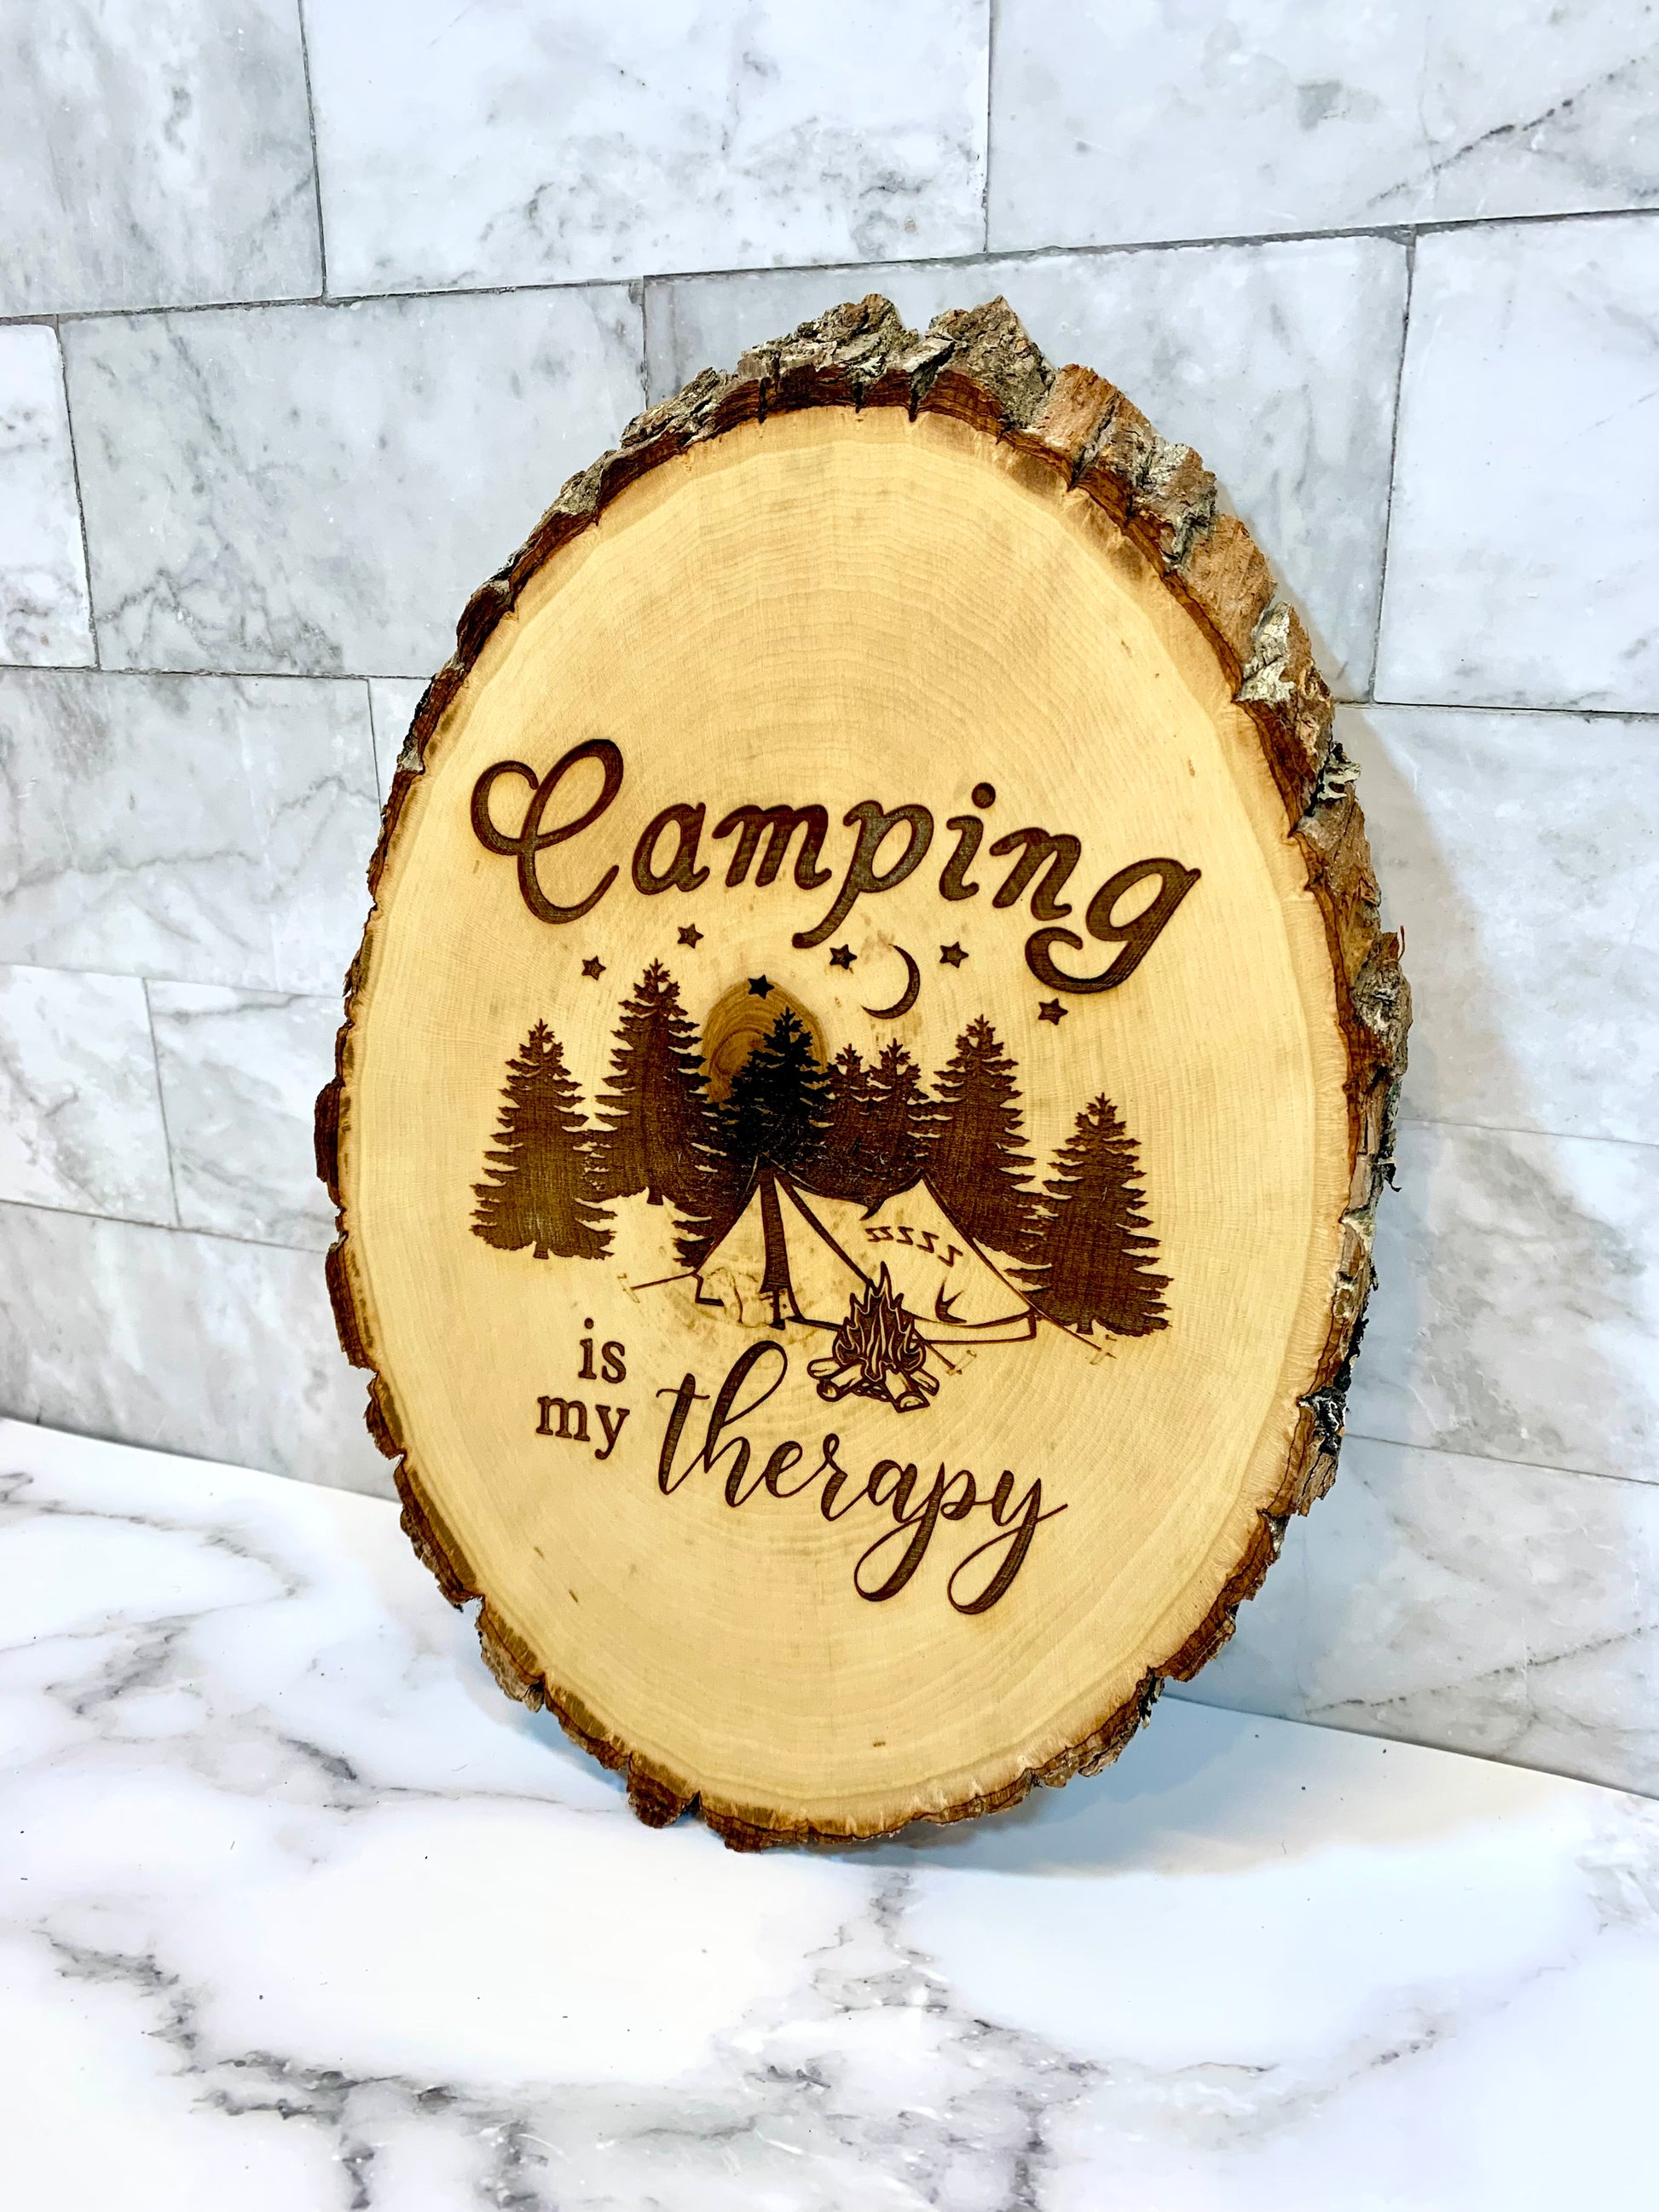 Camping Is My Therapy Live Edge Wooden Camping Sign - MixMatched Creations